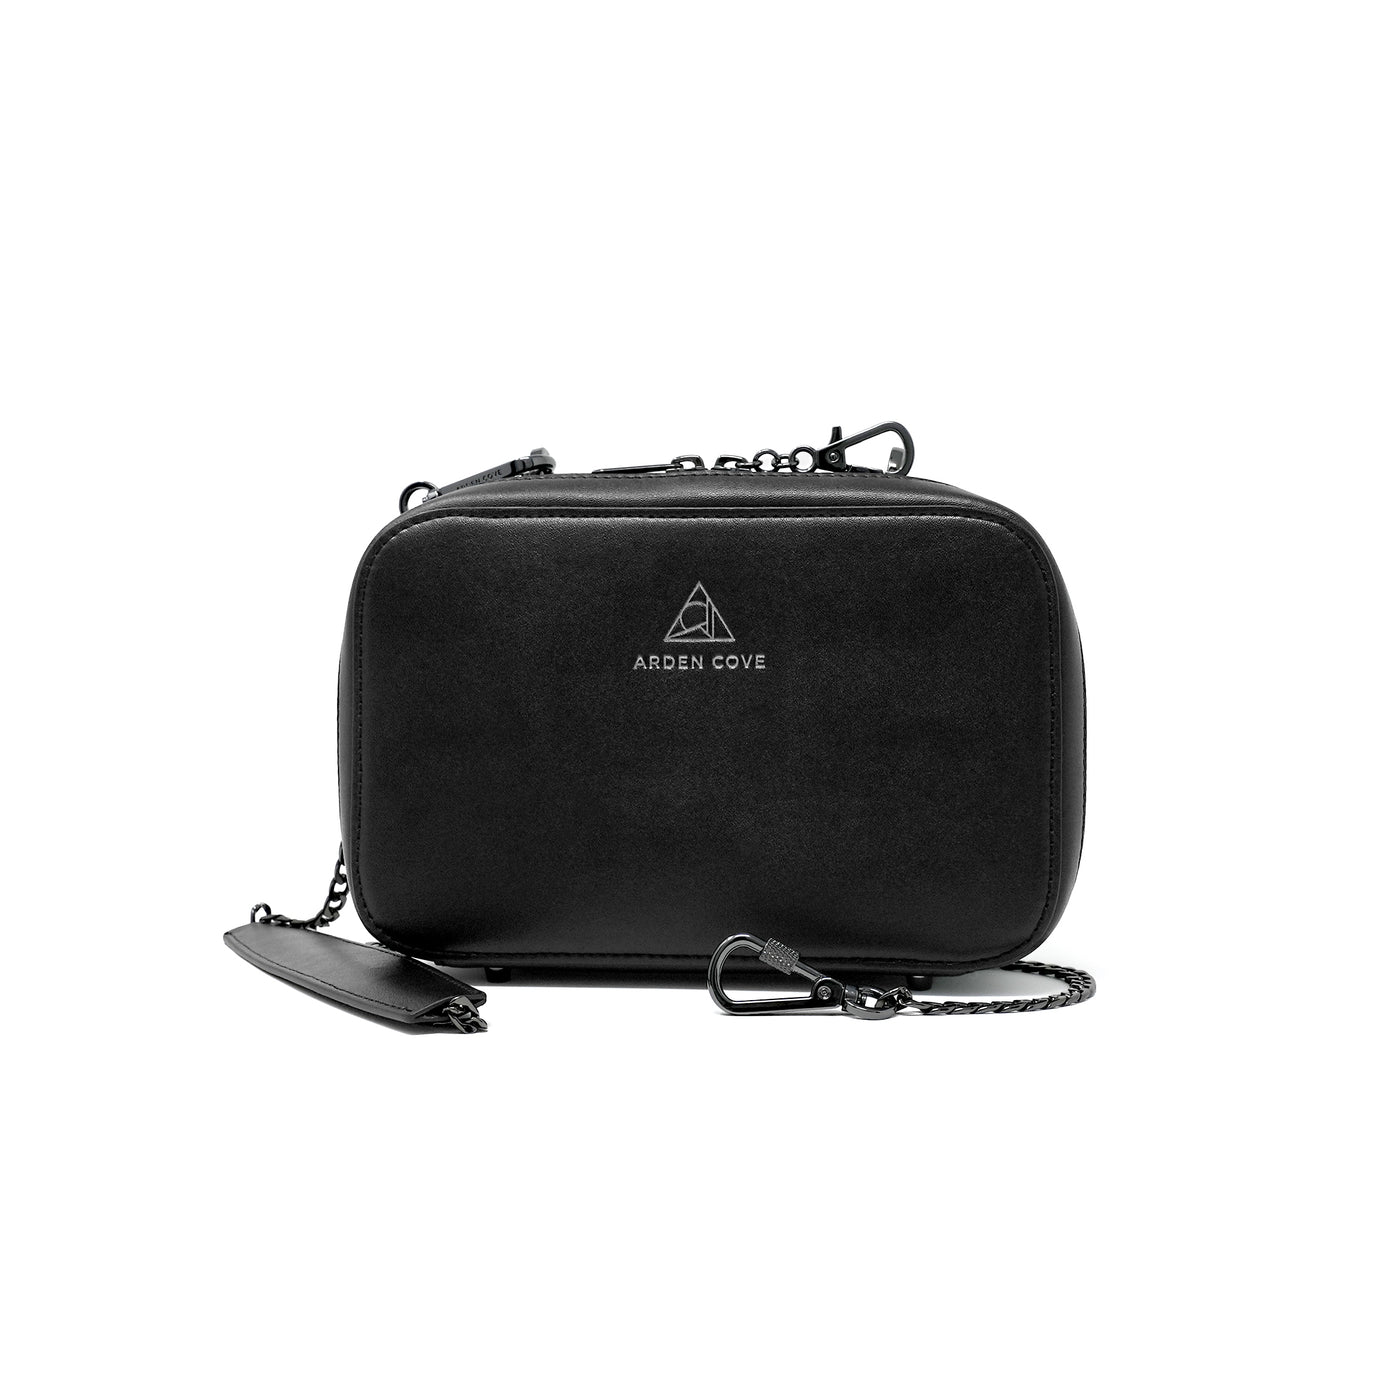 Anti-theft Water-resistant Travel Crossbody - Elise Crossbody in Black Gunmetal with slash-resistant chain & locking clasps straps - front view - Arden Cove